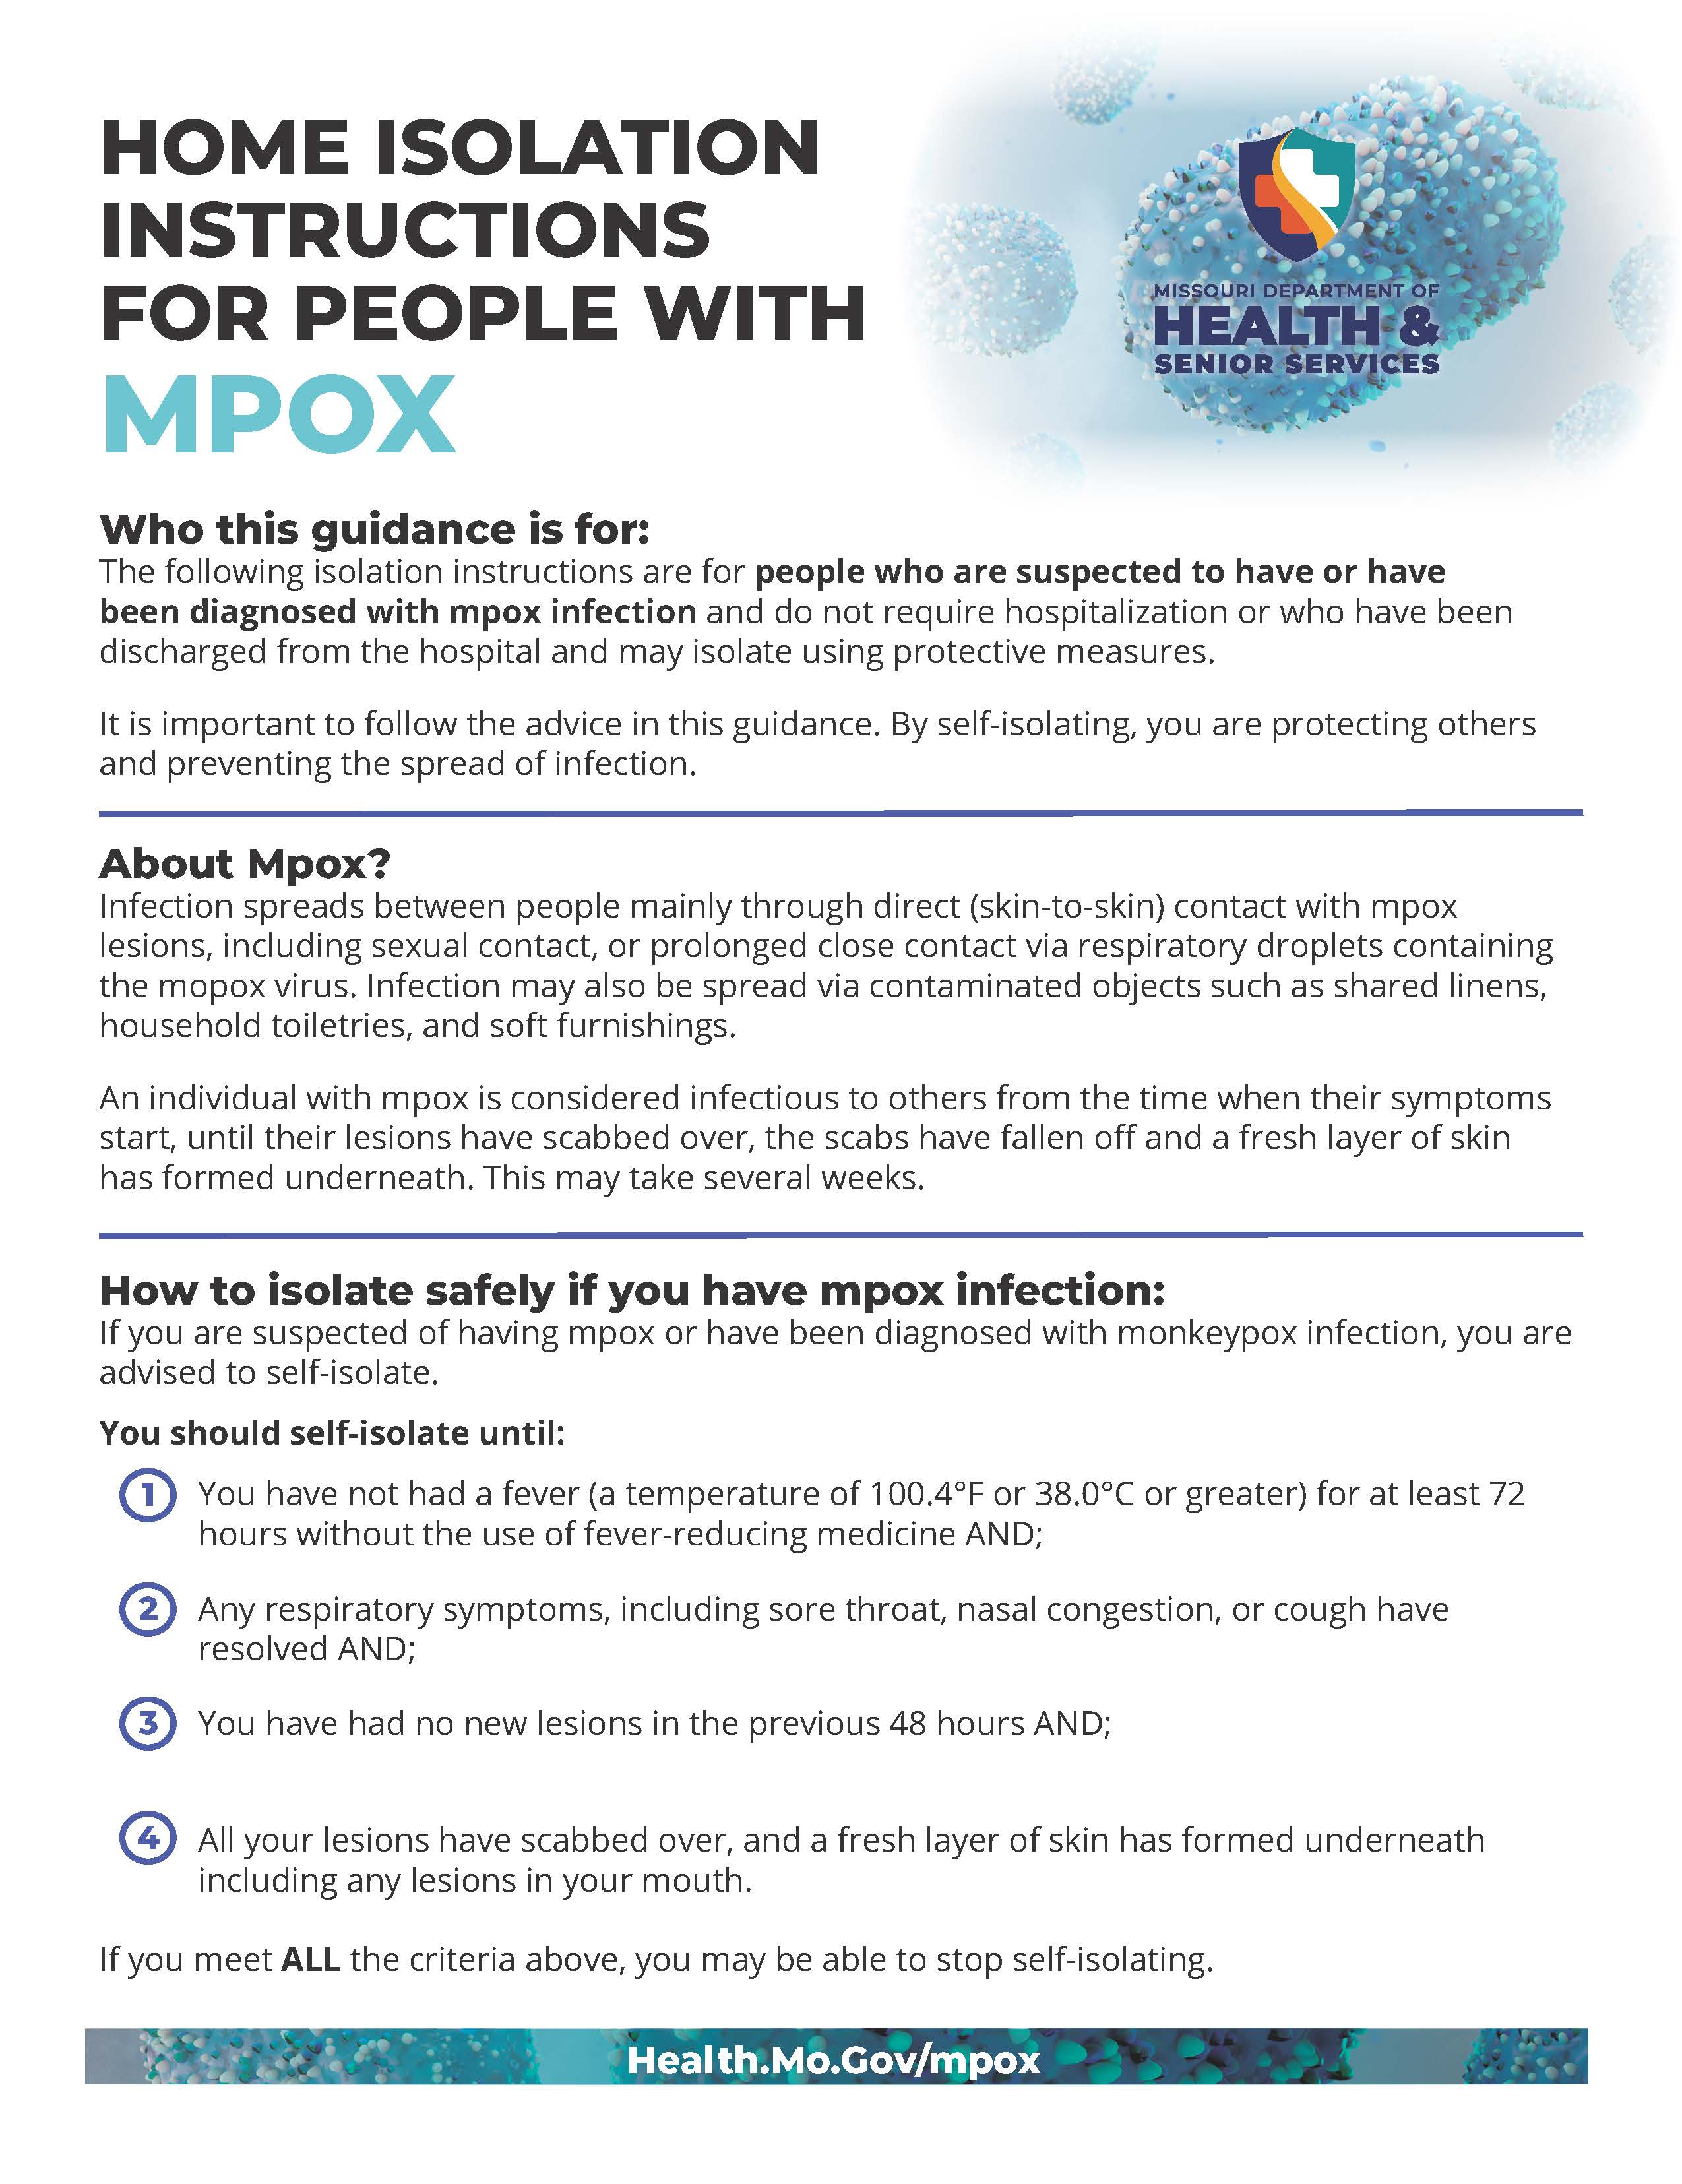 Home Isolation Instructions for People with Mpox Infection